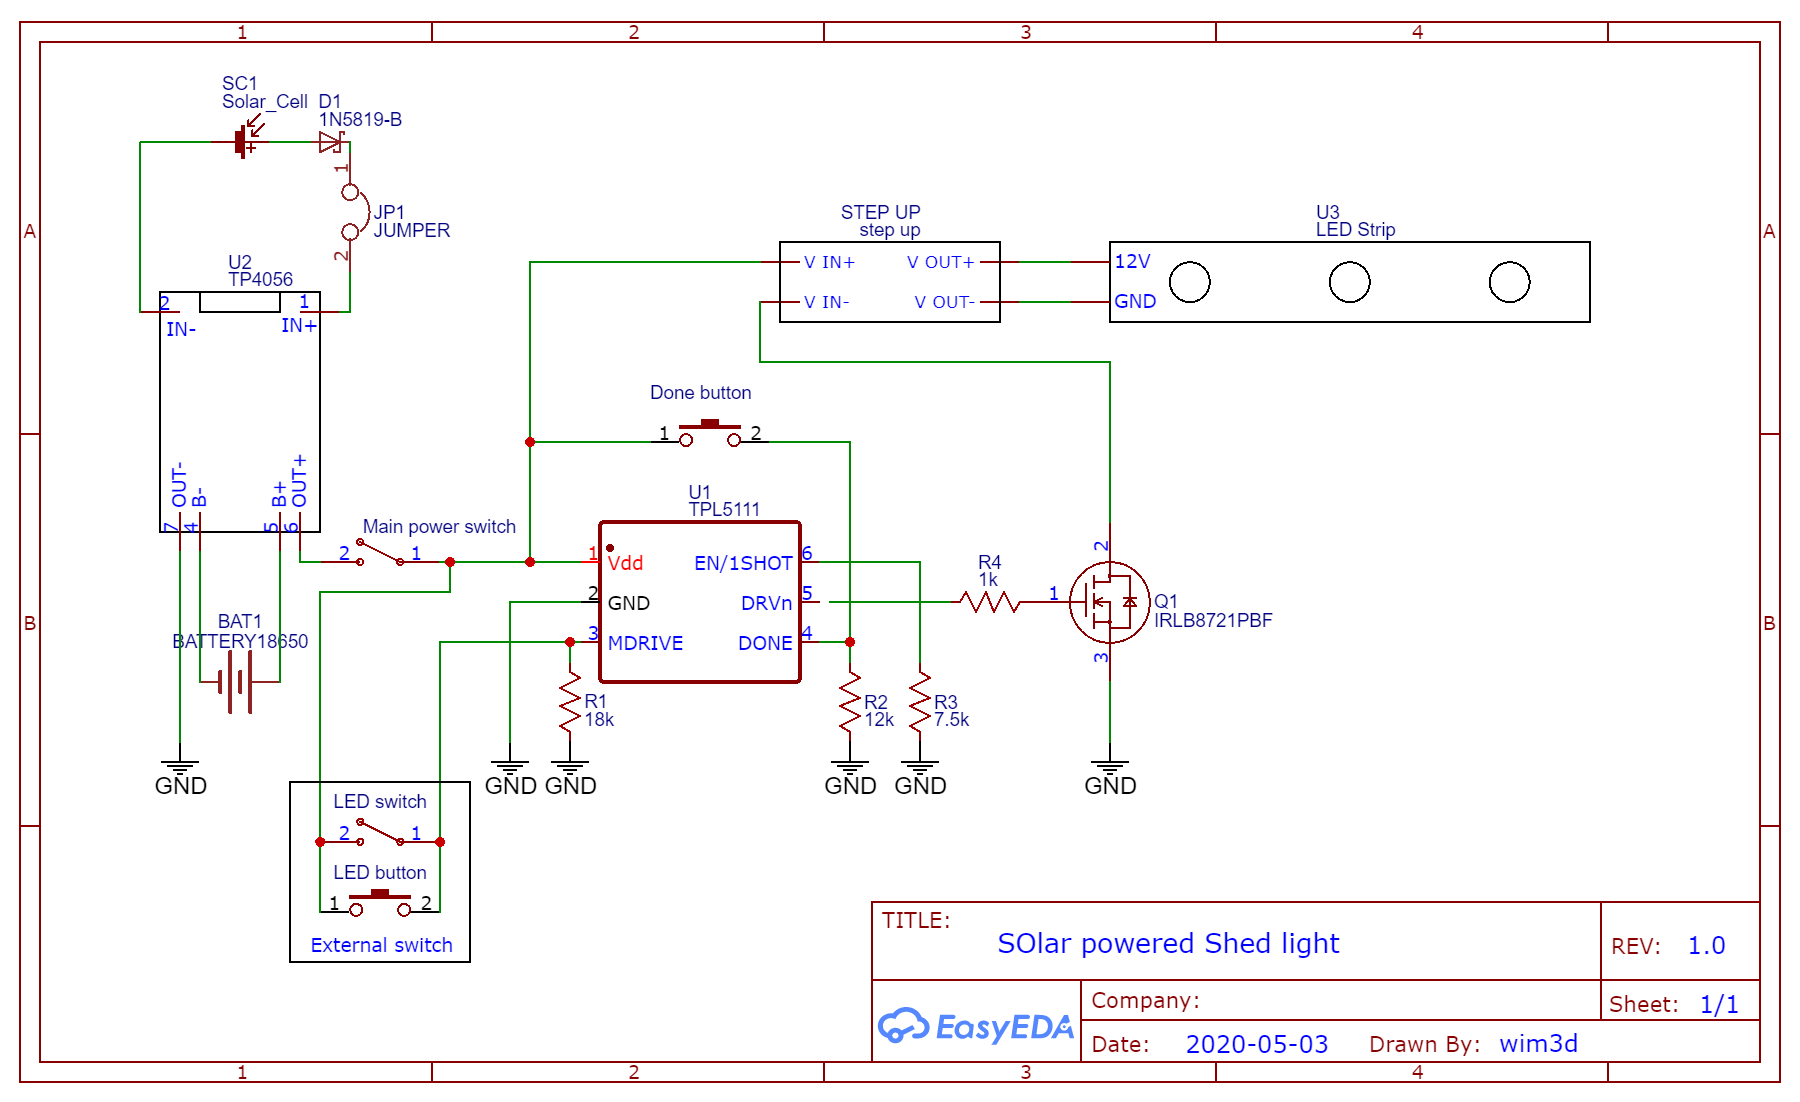 Schematic_Shed_Light_2020-05-03_16-12-46.png